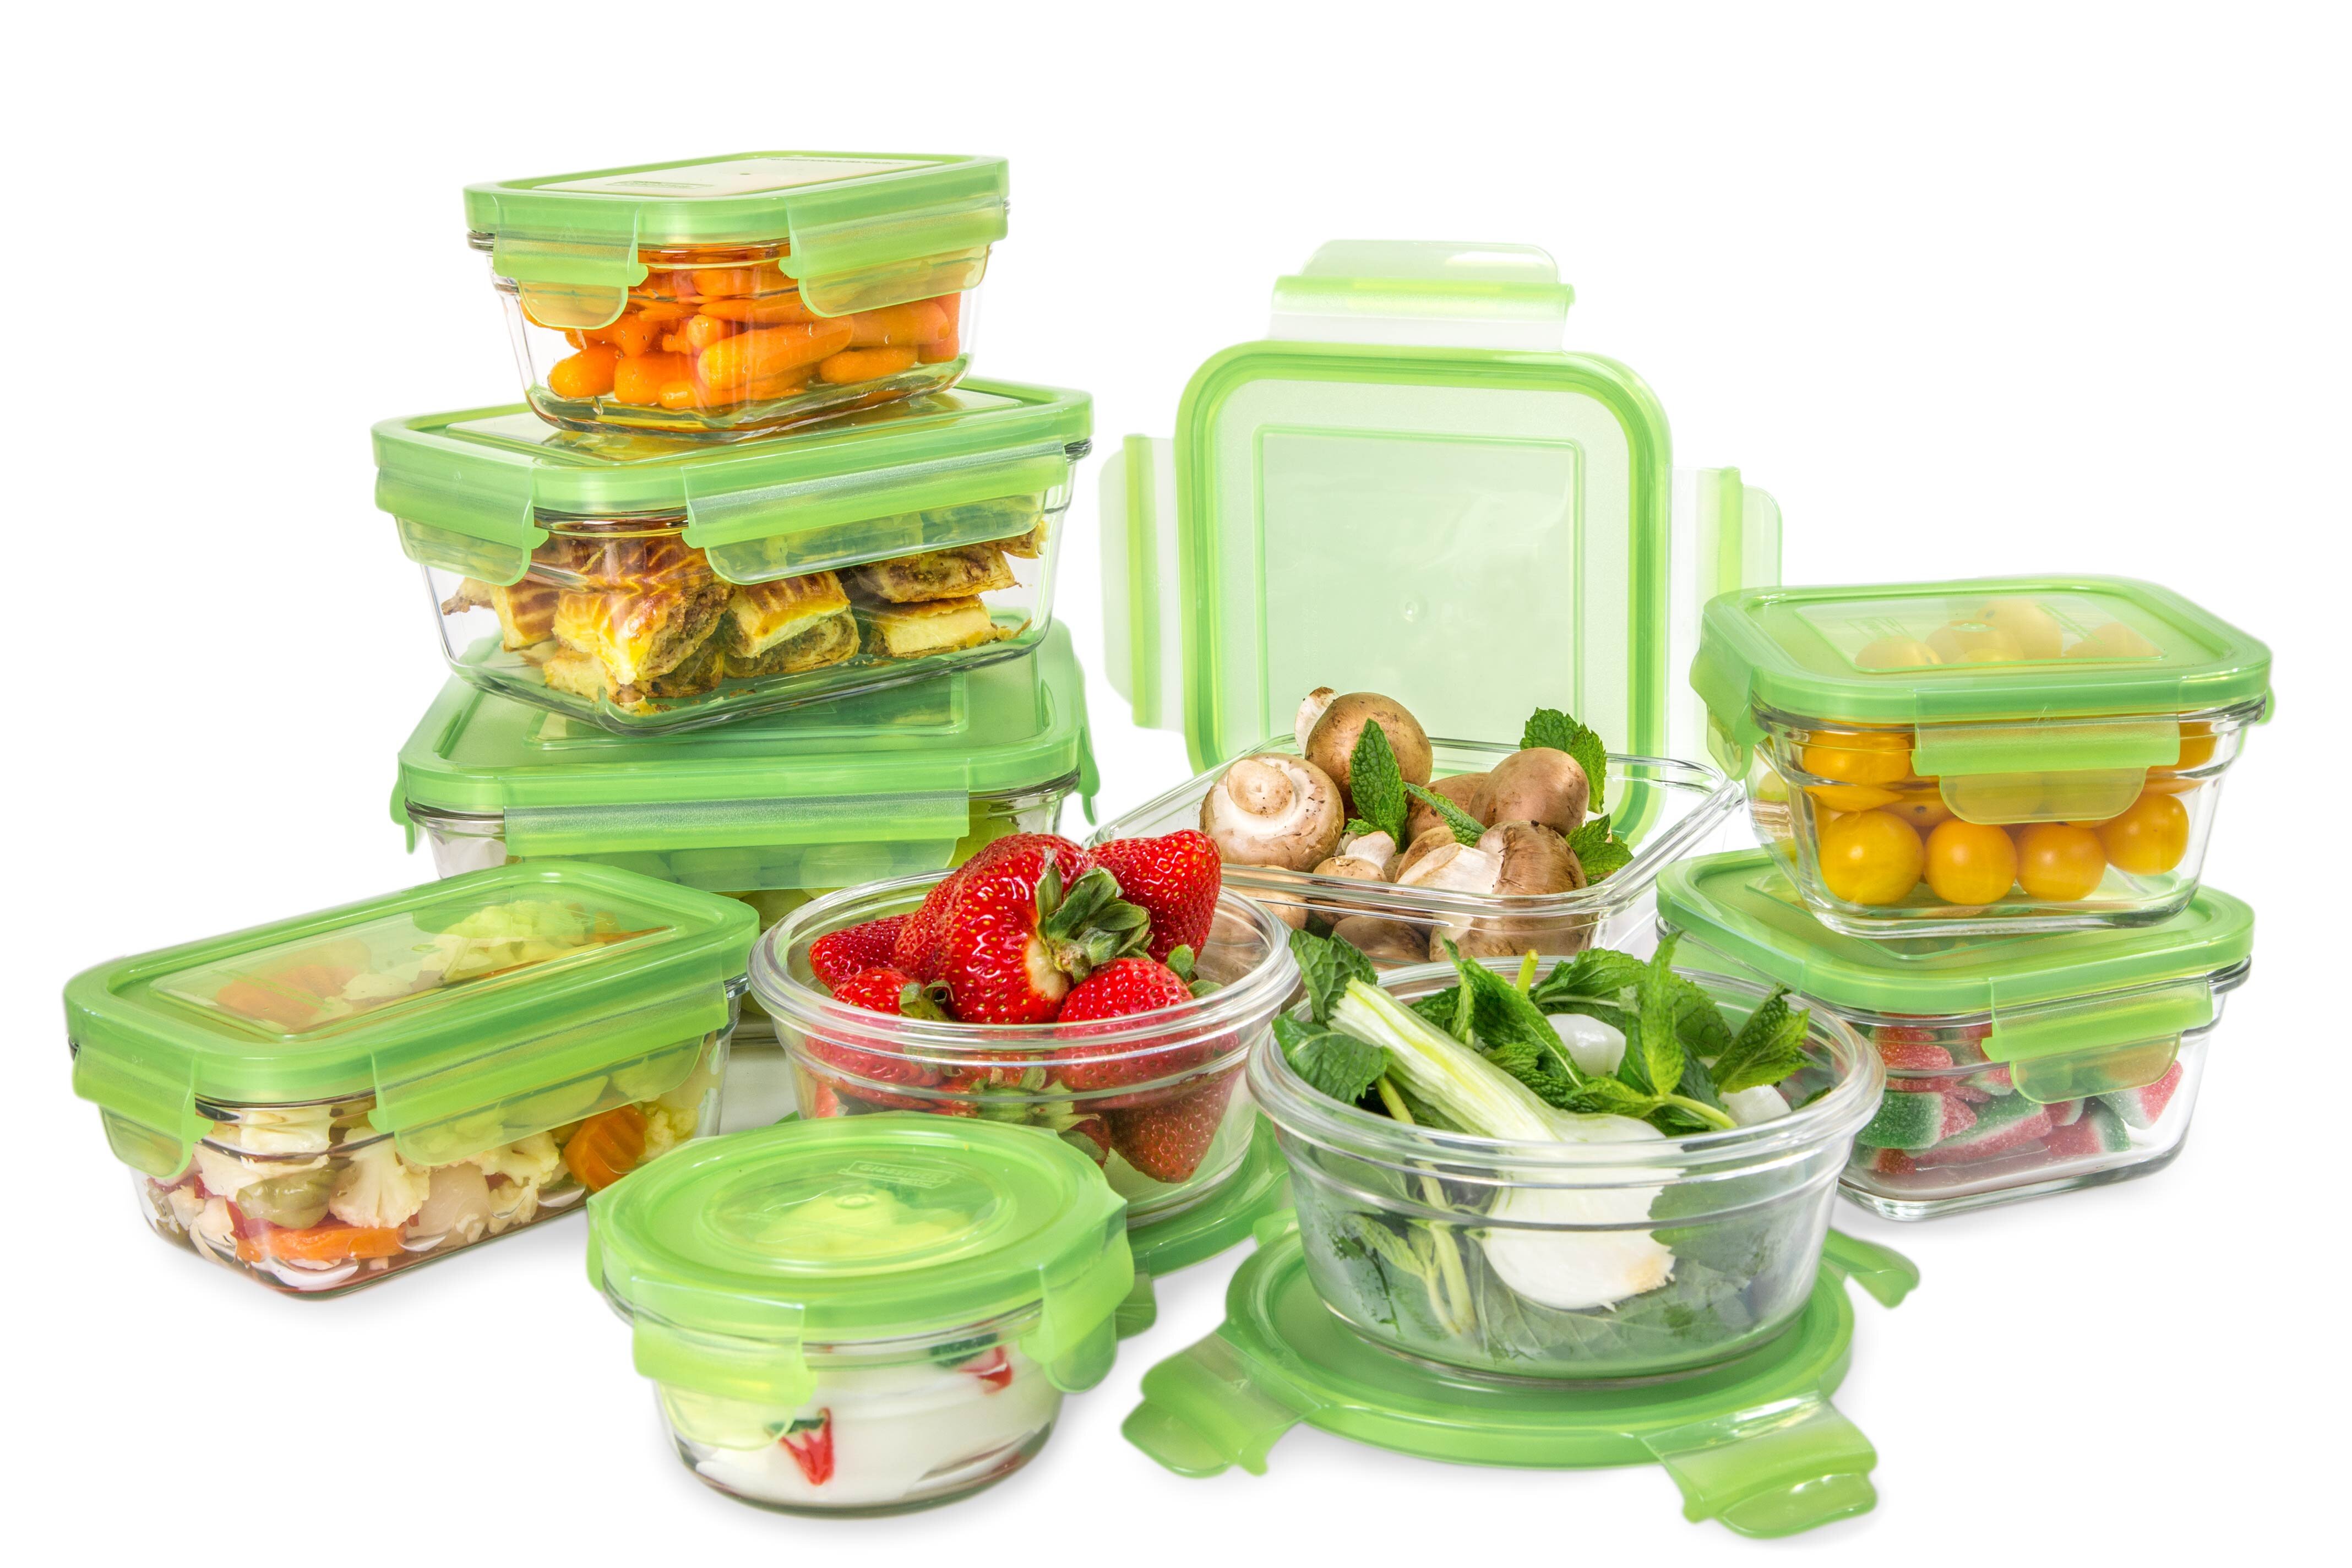 Glasslock Oven and Microwave Safe Glass Food Storage Containers 10 Piece Set